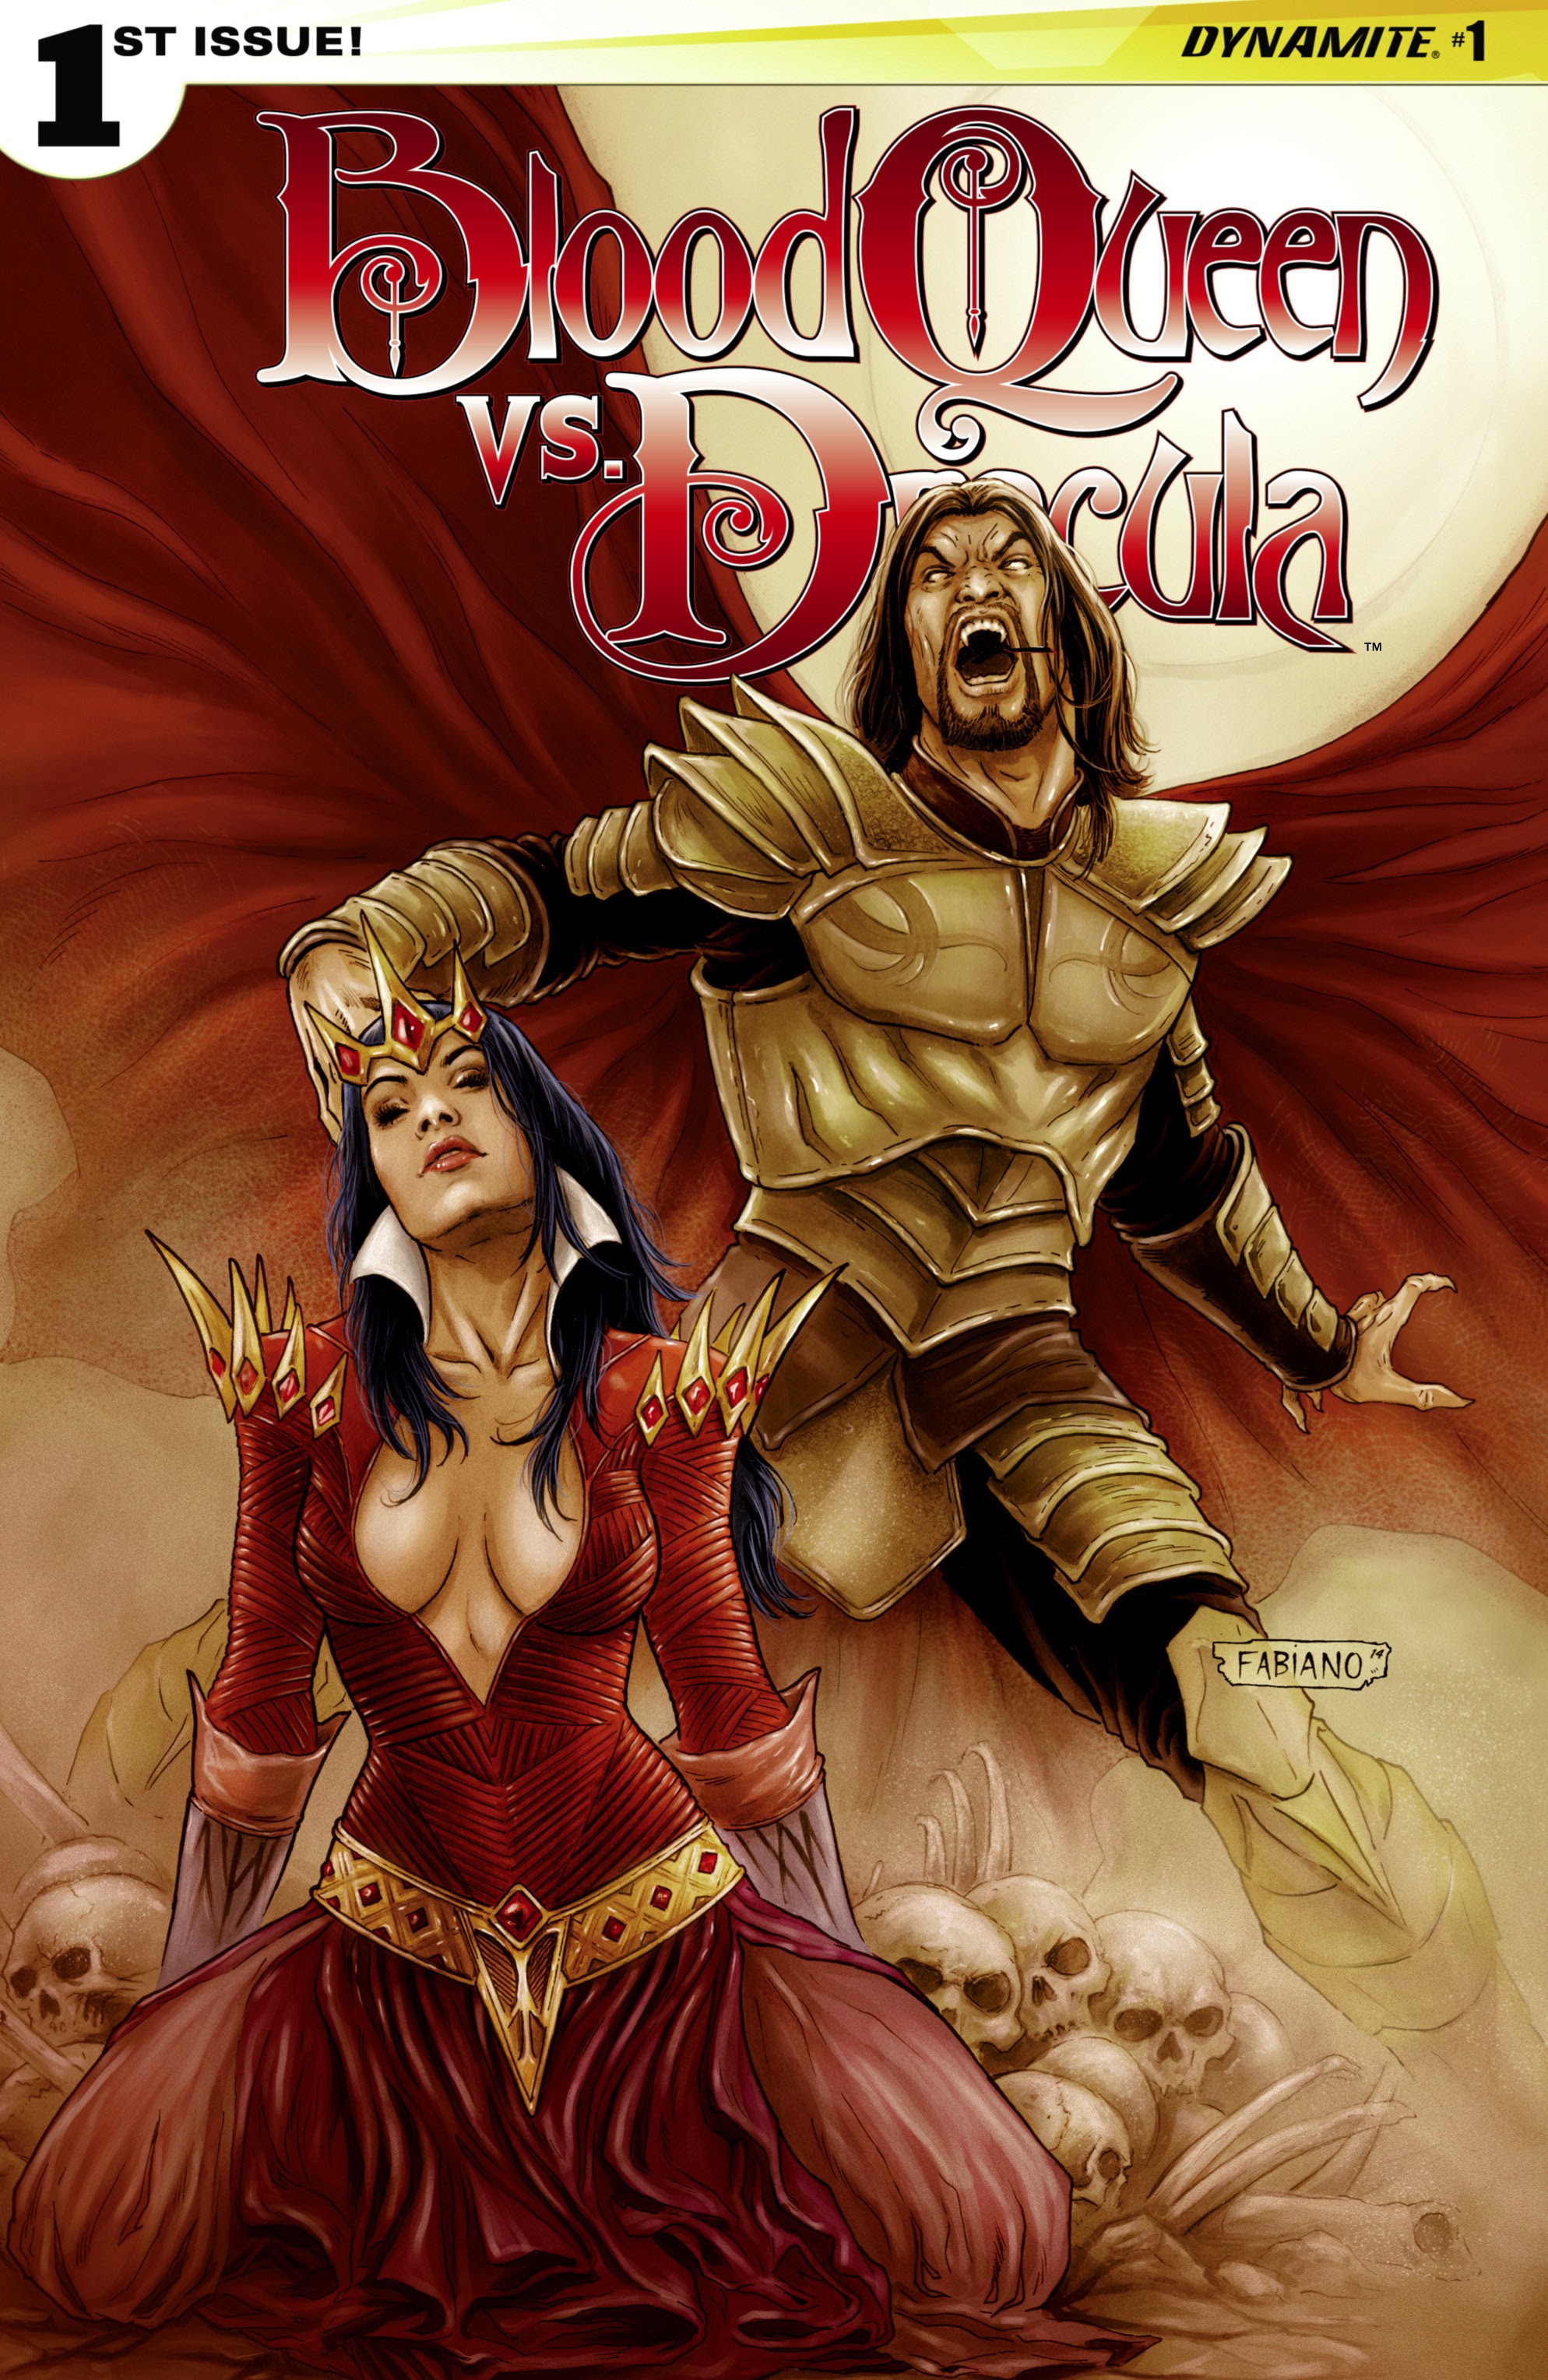 Read online Blood Queen Vs. Dracula comic -  Issue #1 - 2